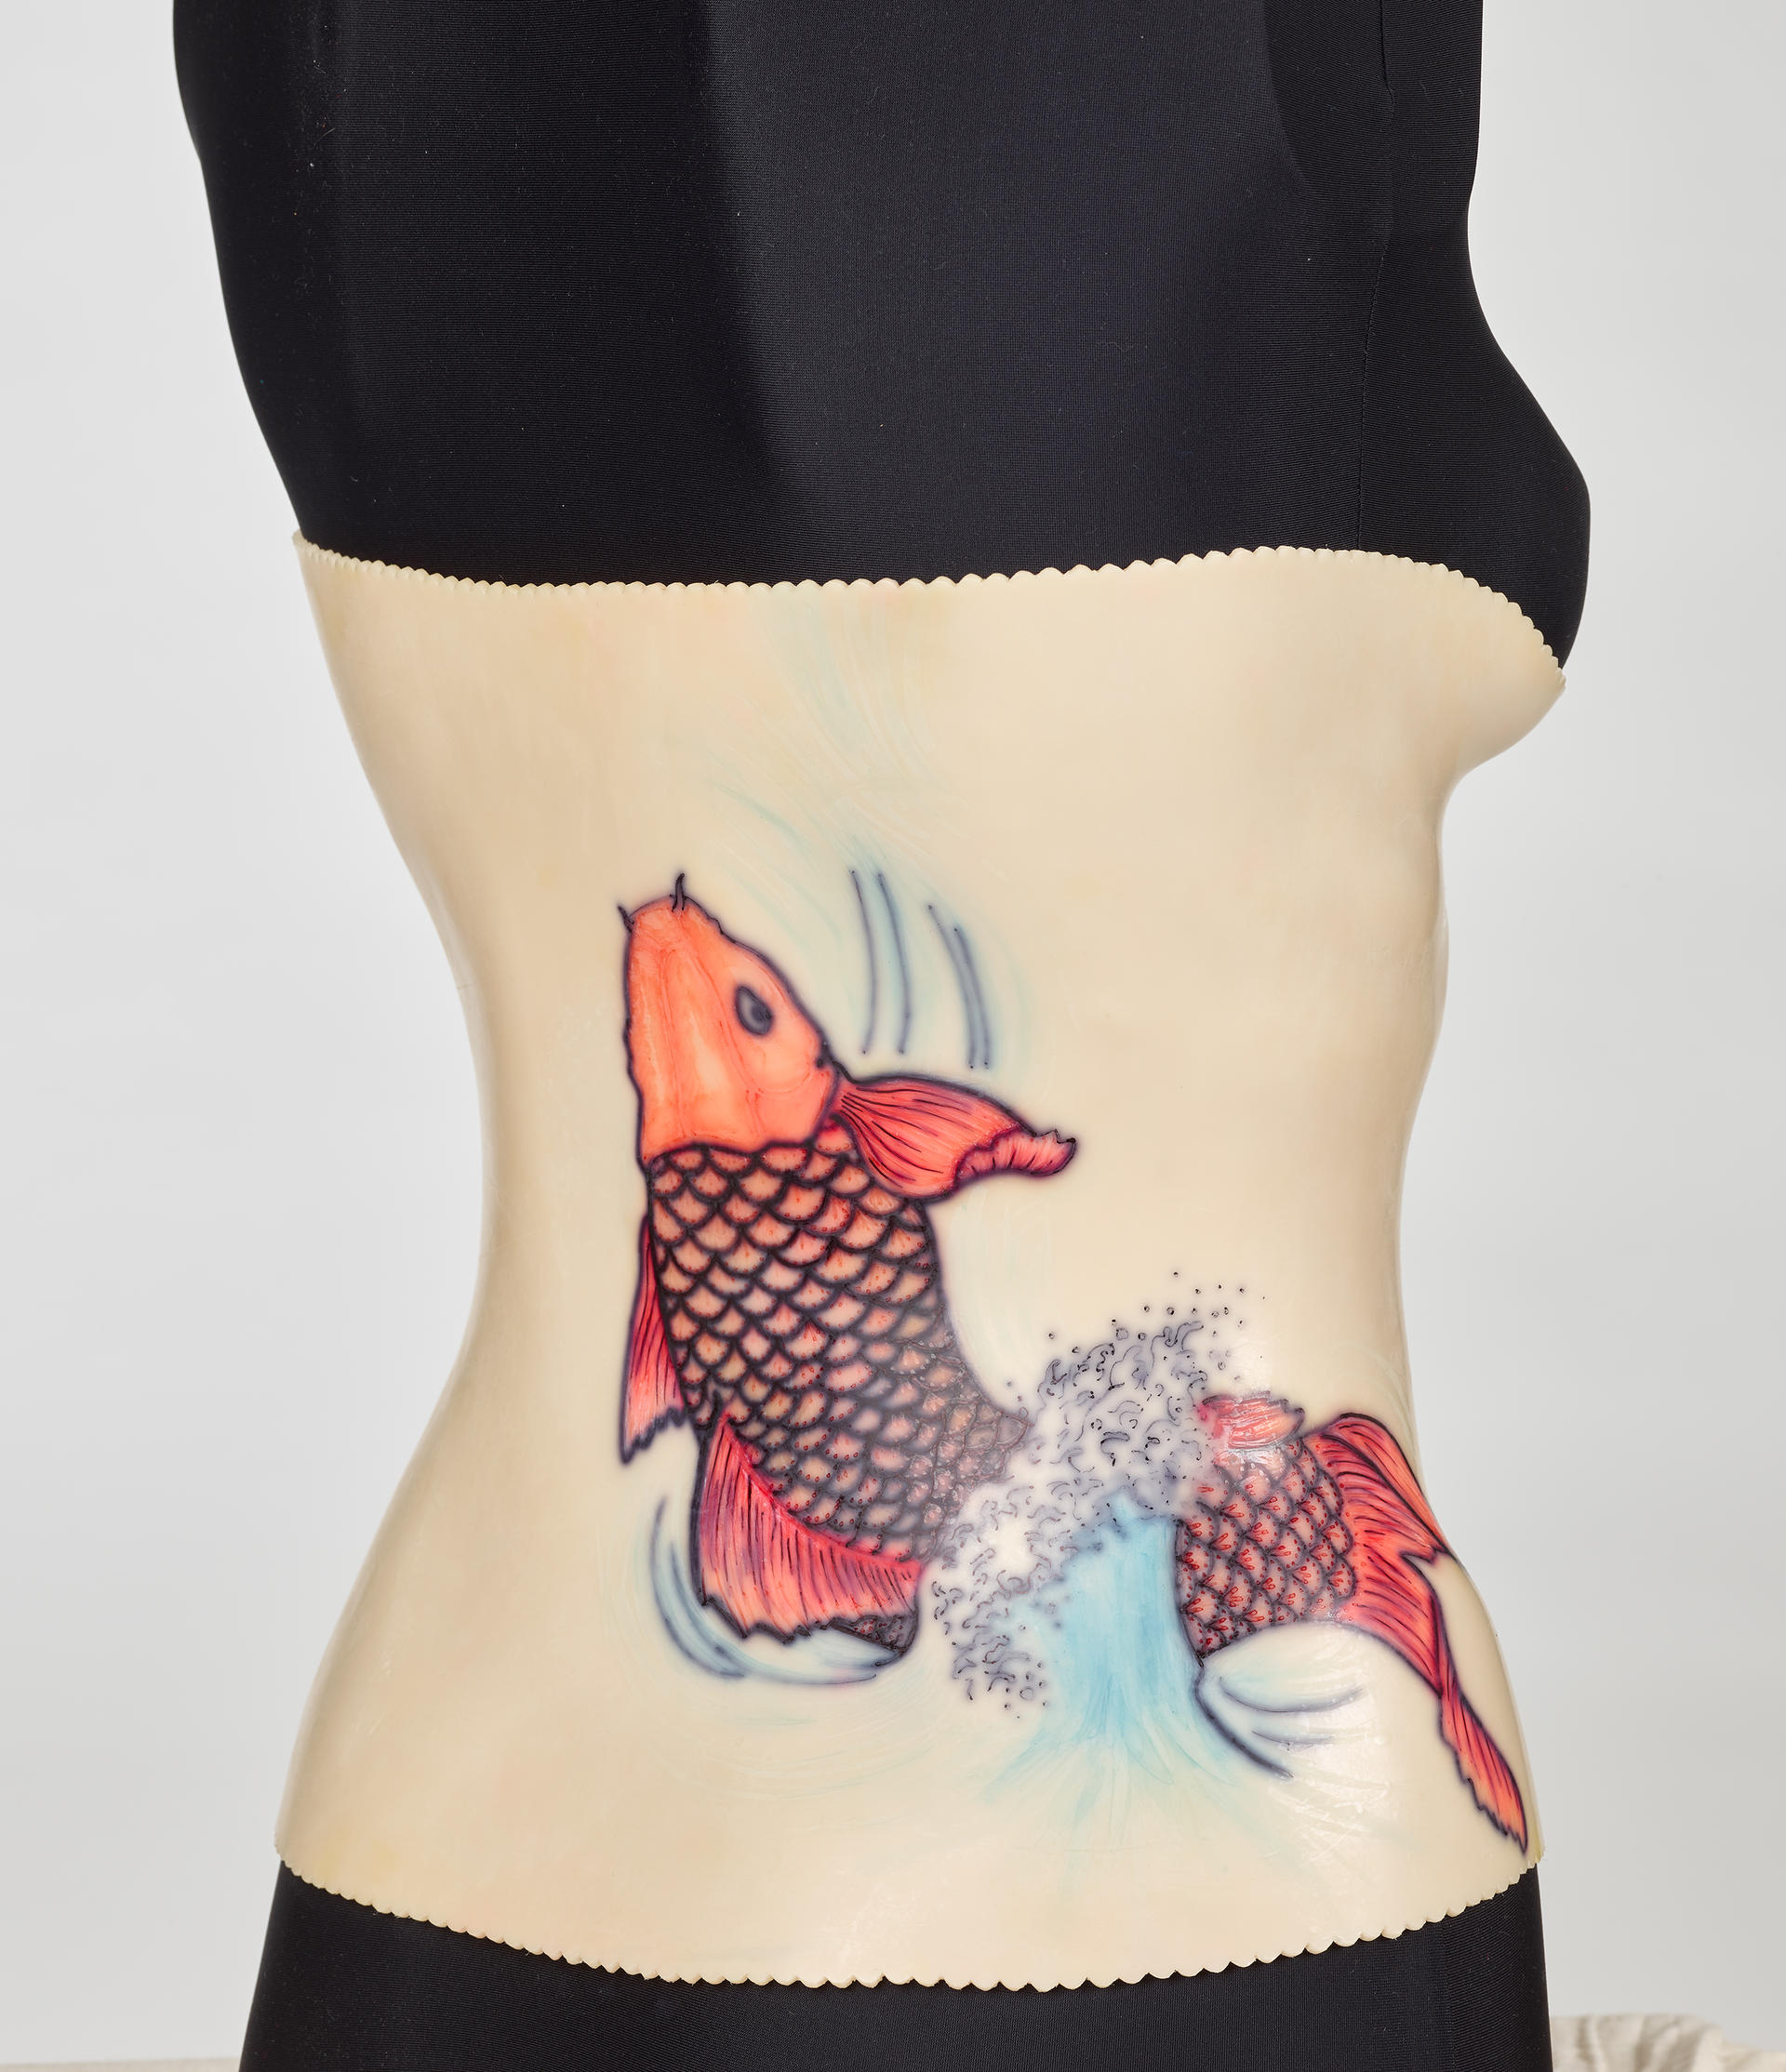 An off-white back brace is molded onto a black mannequin torso. The plastic brace attaches down the middle of the torso. A red koi design decorates the right side.